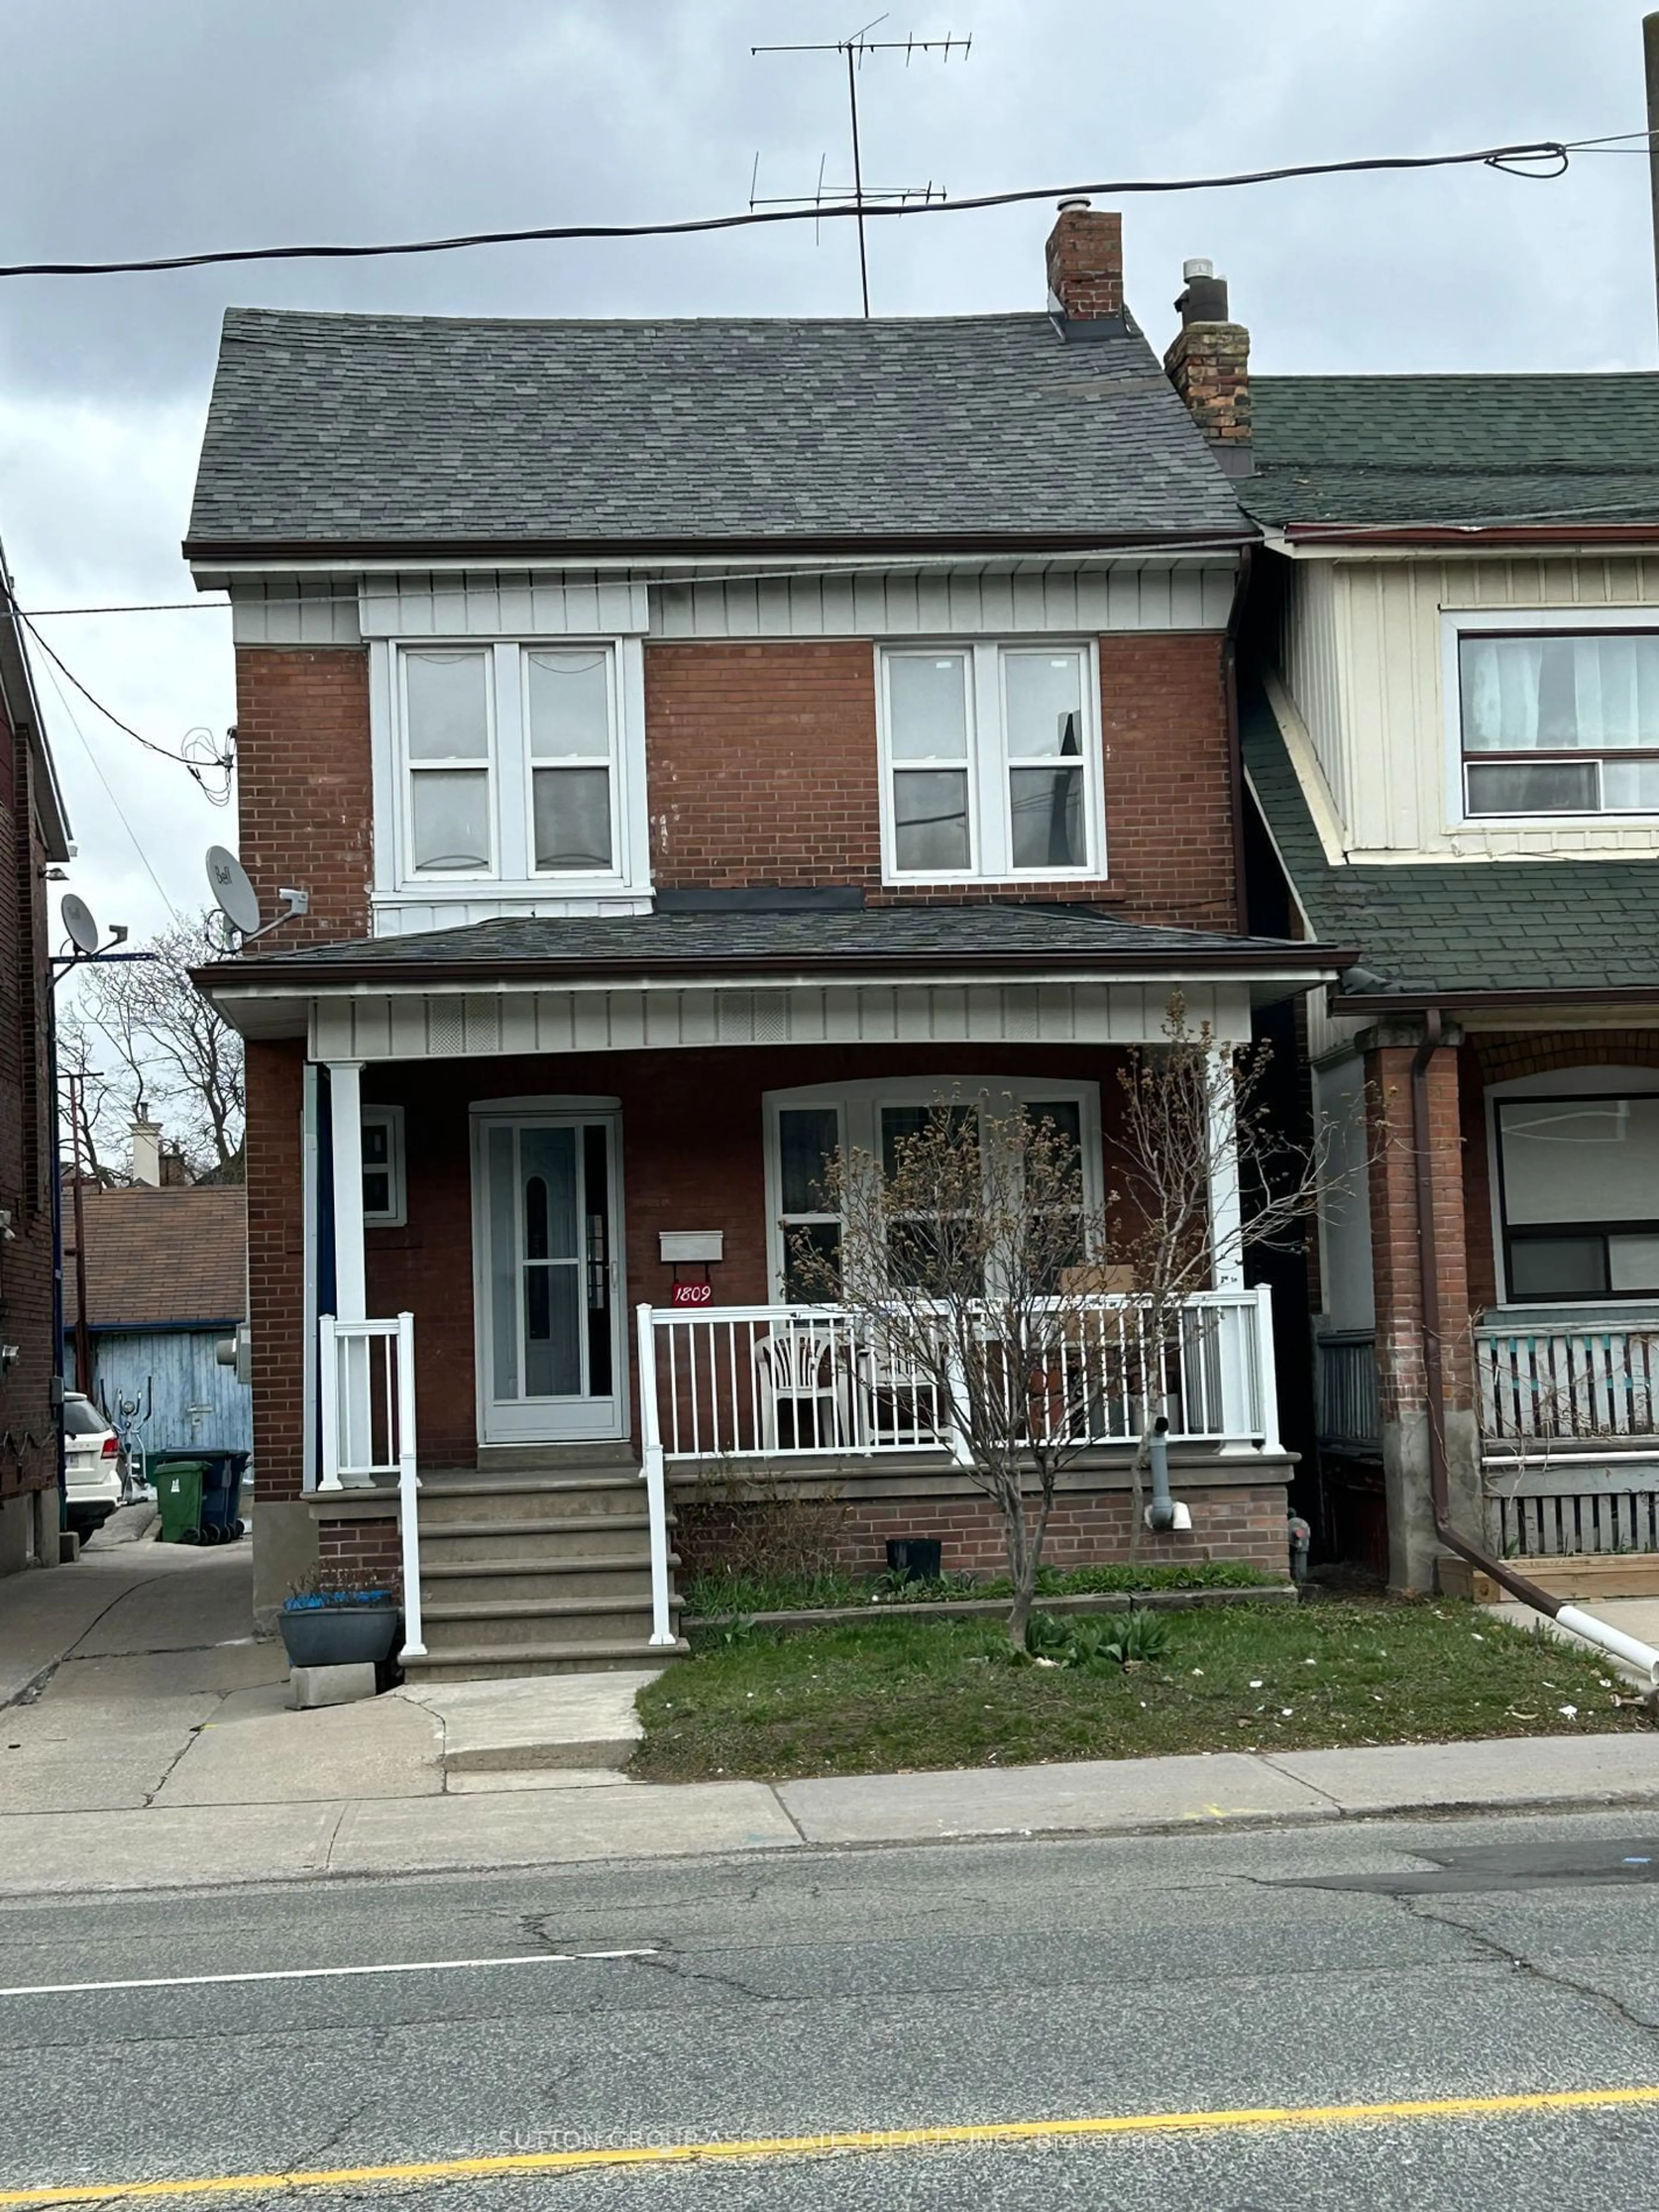 Frontside or backside of a home for 1809 Dufferin St, Toronto Ontario M6E 3P5